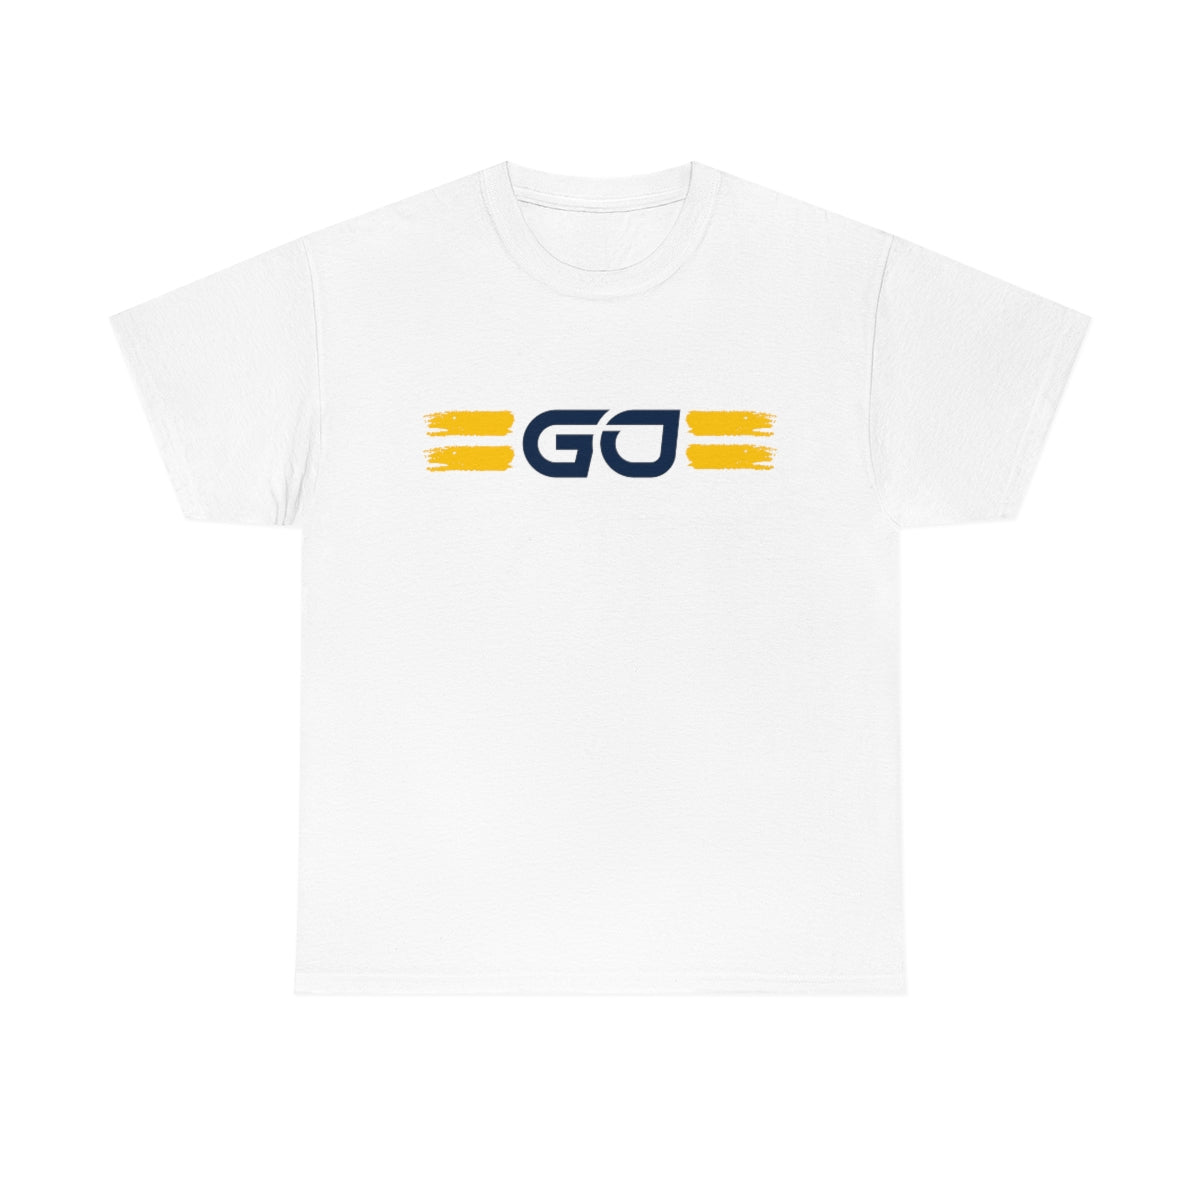 Gabriel Onorato Team Colors Tee